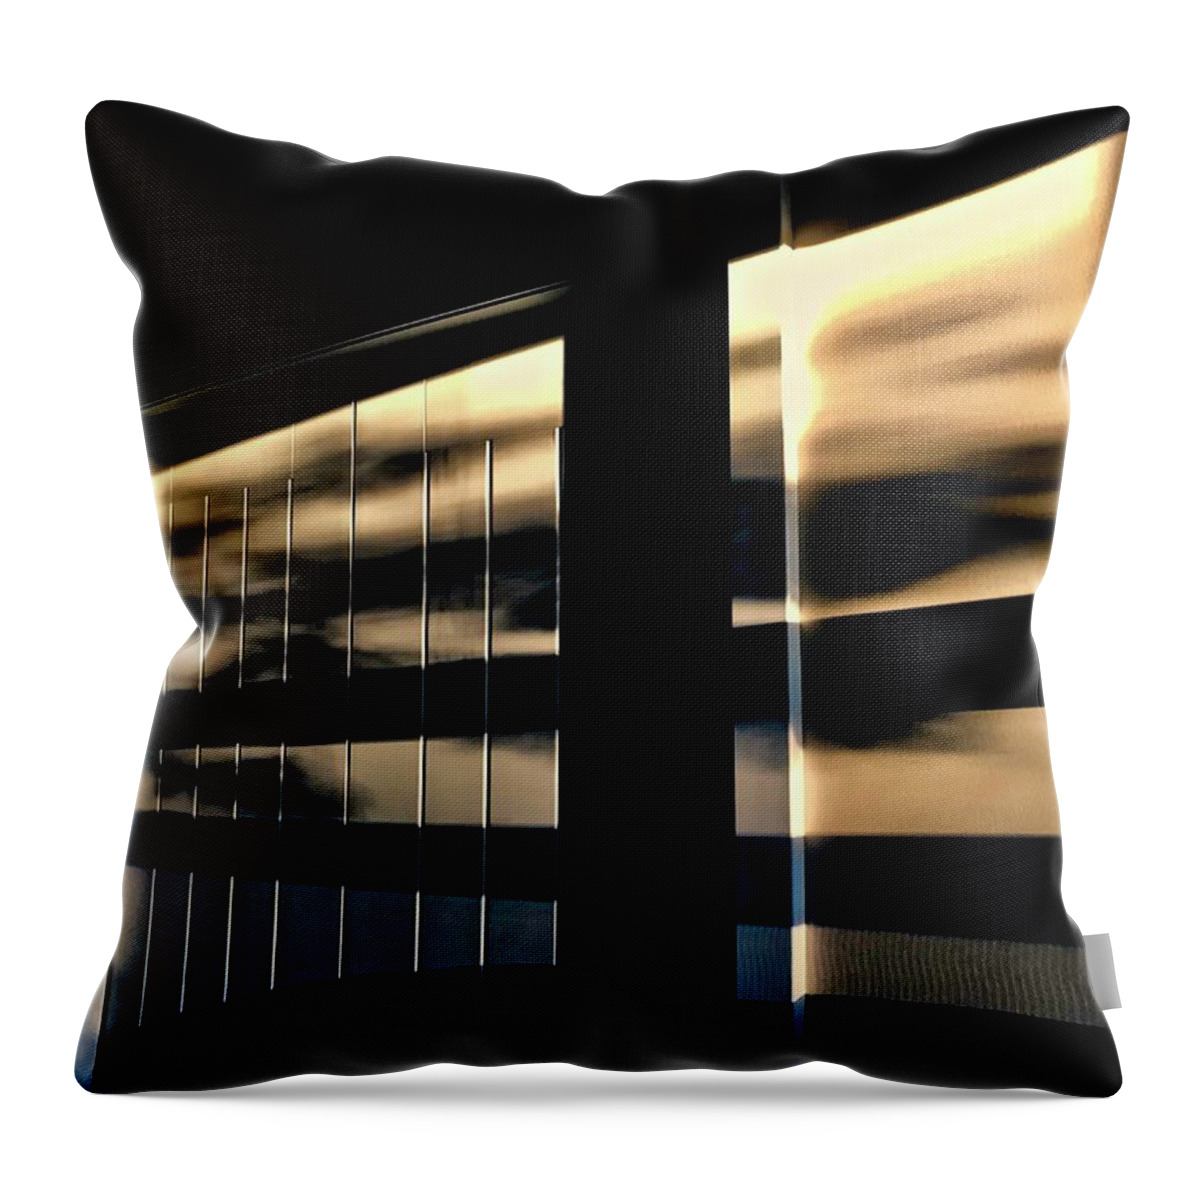 Faces In The Shadows As The Sun Sets. Throw Pillow featuring the photograph Faces in the Shadows as the sun sets by Brian Sereda